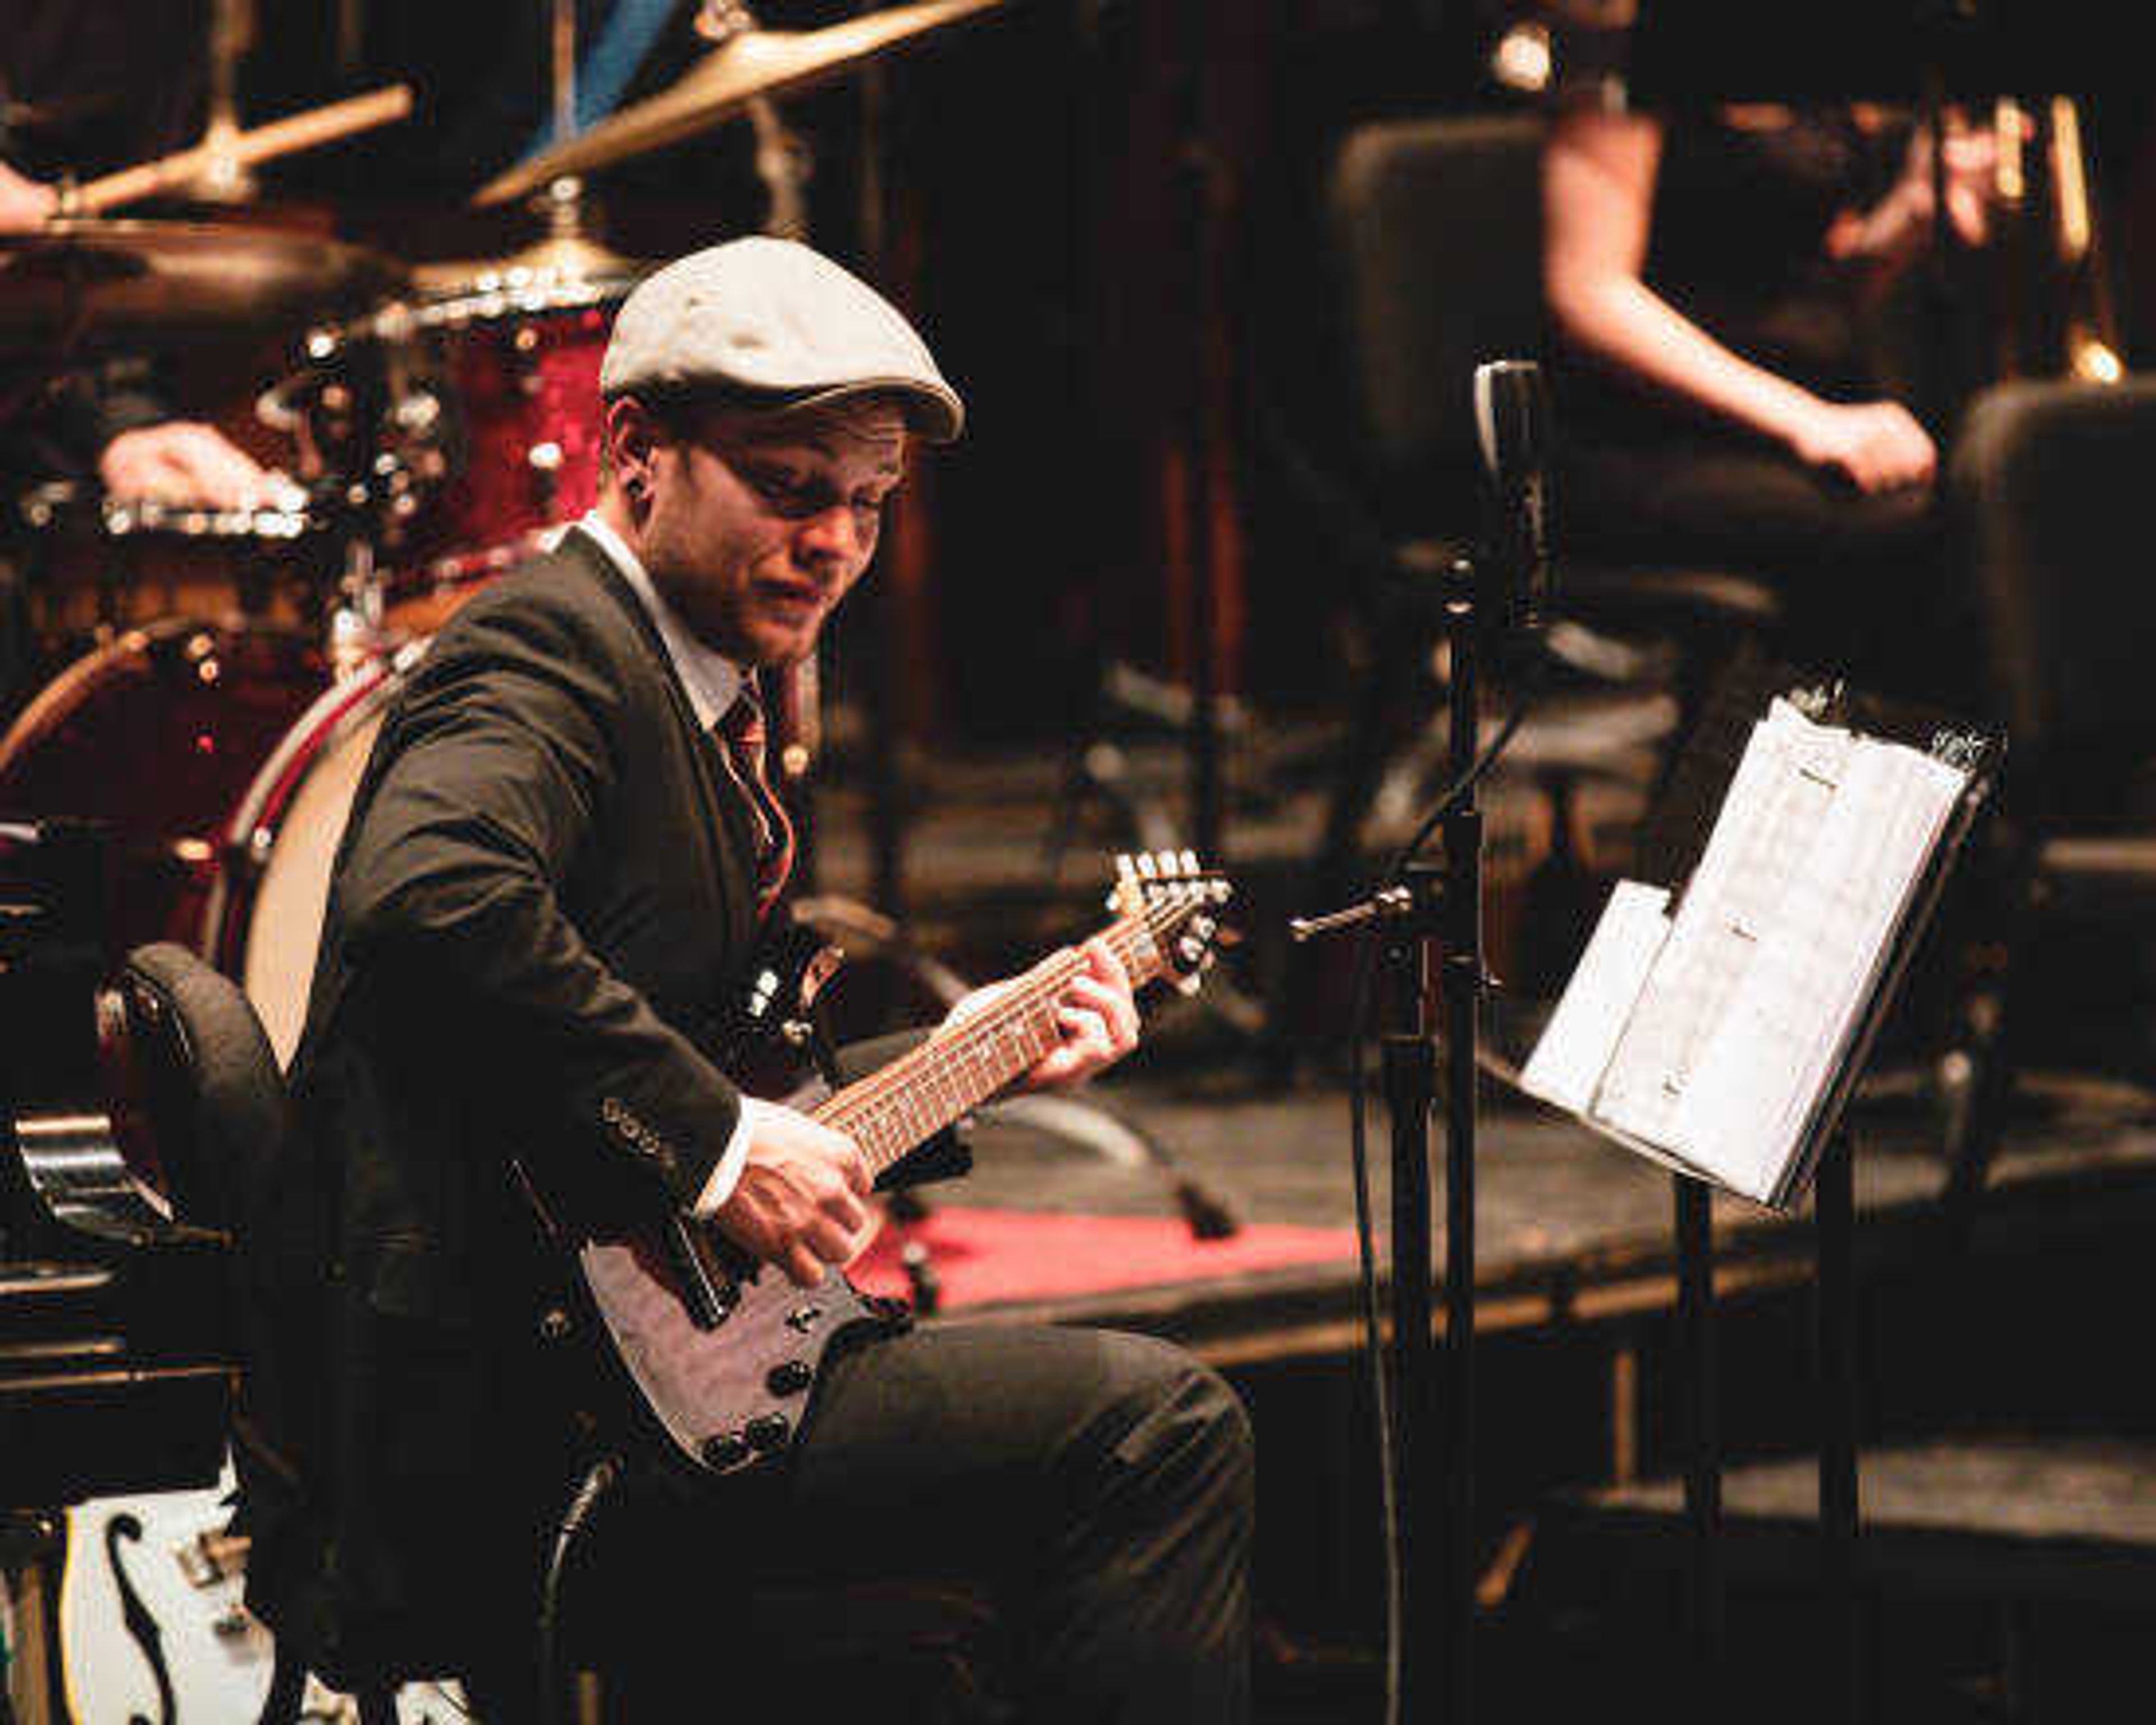 Guitarist Michael Jones performing during the 22nd Annual Clark Terry/Phi Mu Alpha Jazz Festival Gala Concert on Feb. 7 in Bedell Performance Hall in Cape Girardeau, Mo.